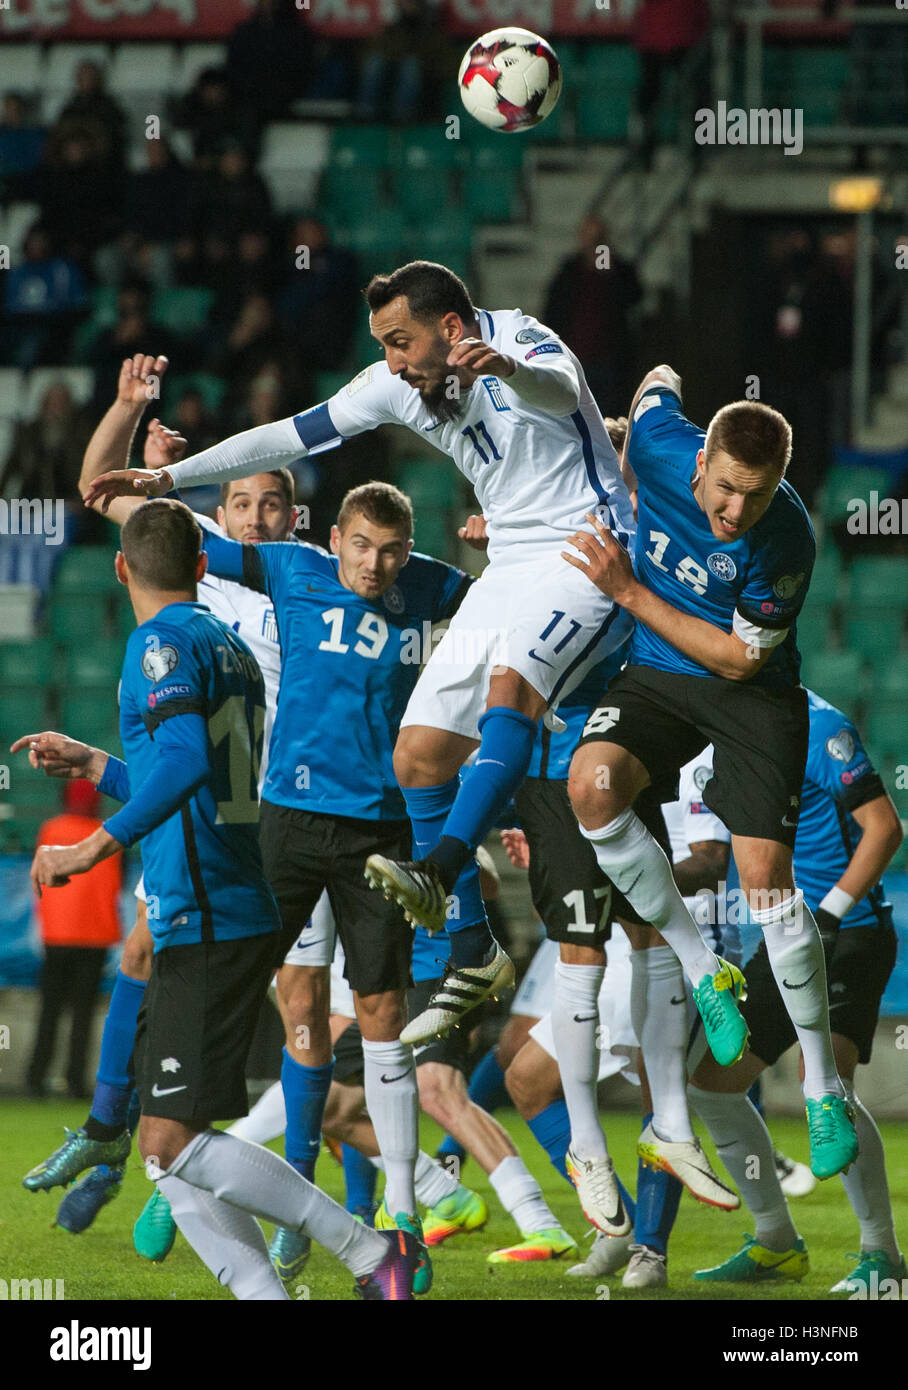 Tallinn, Estonia, 10th October 2016. Karol Mets (R) and Ken Kallaste (2nd L) of Estonia fight for the ball with Kostas Mitroglou (C) of Greece in action during the FIFA World Cup 2018 qualifying match between Estonia and Greece. Credit:  Nicolas Bouvy/Alamy Live News Stock Photo